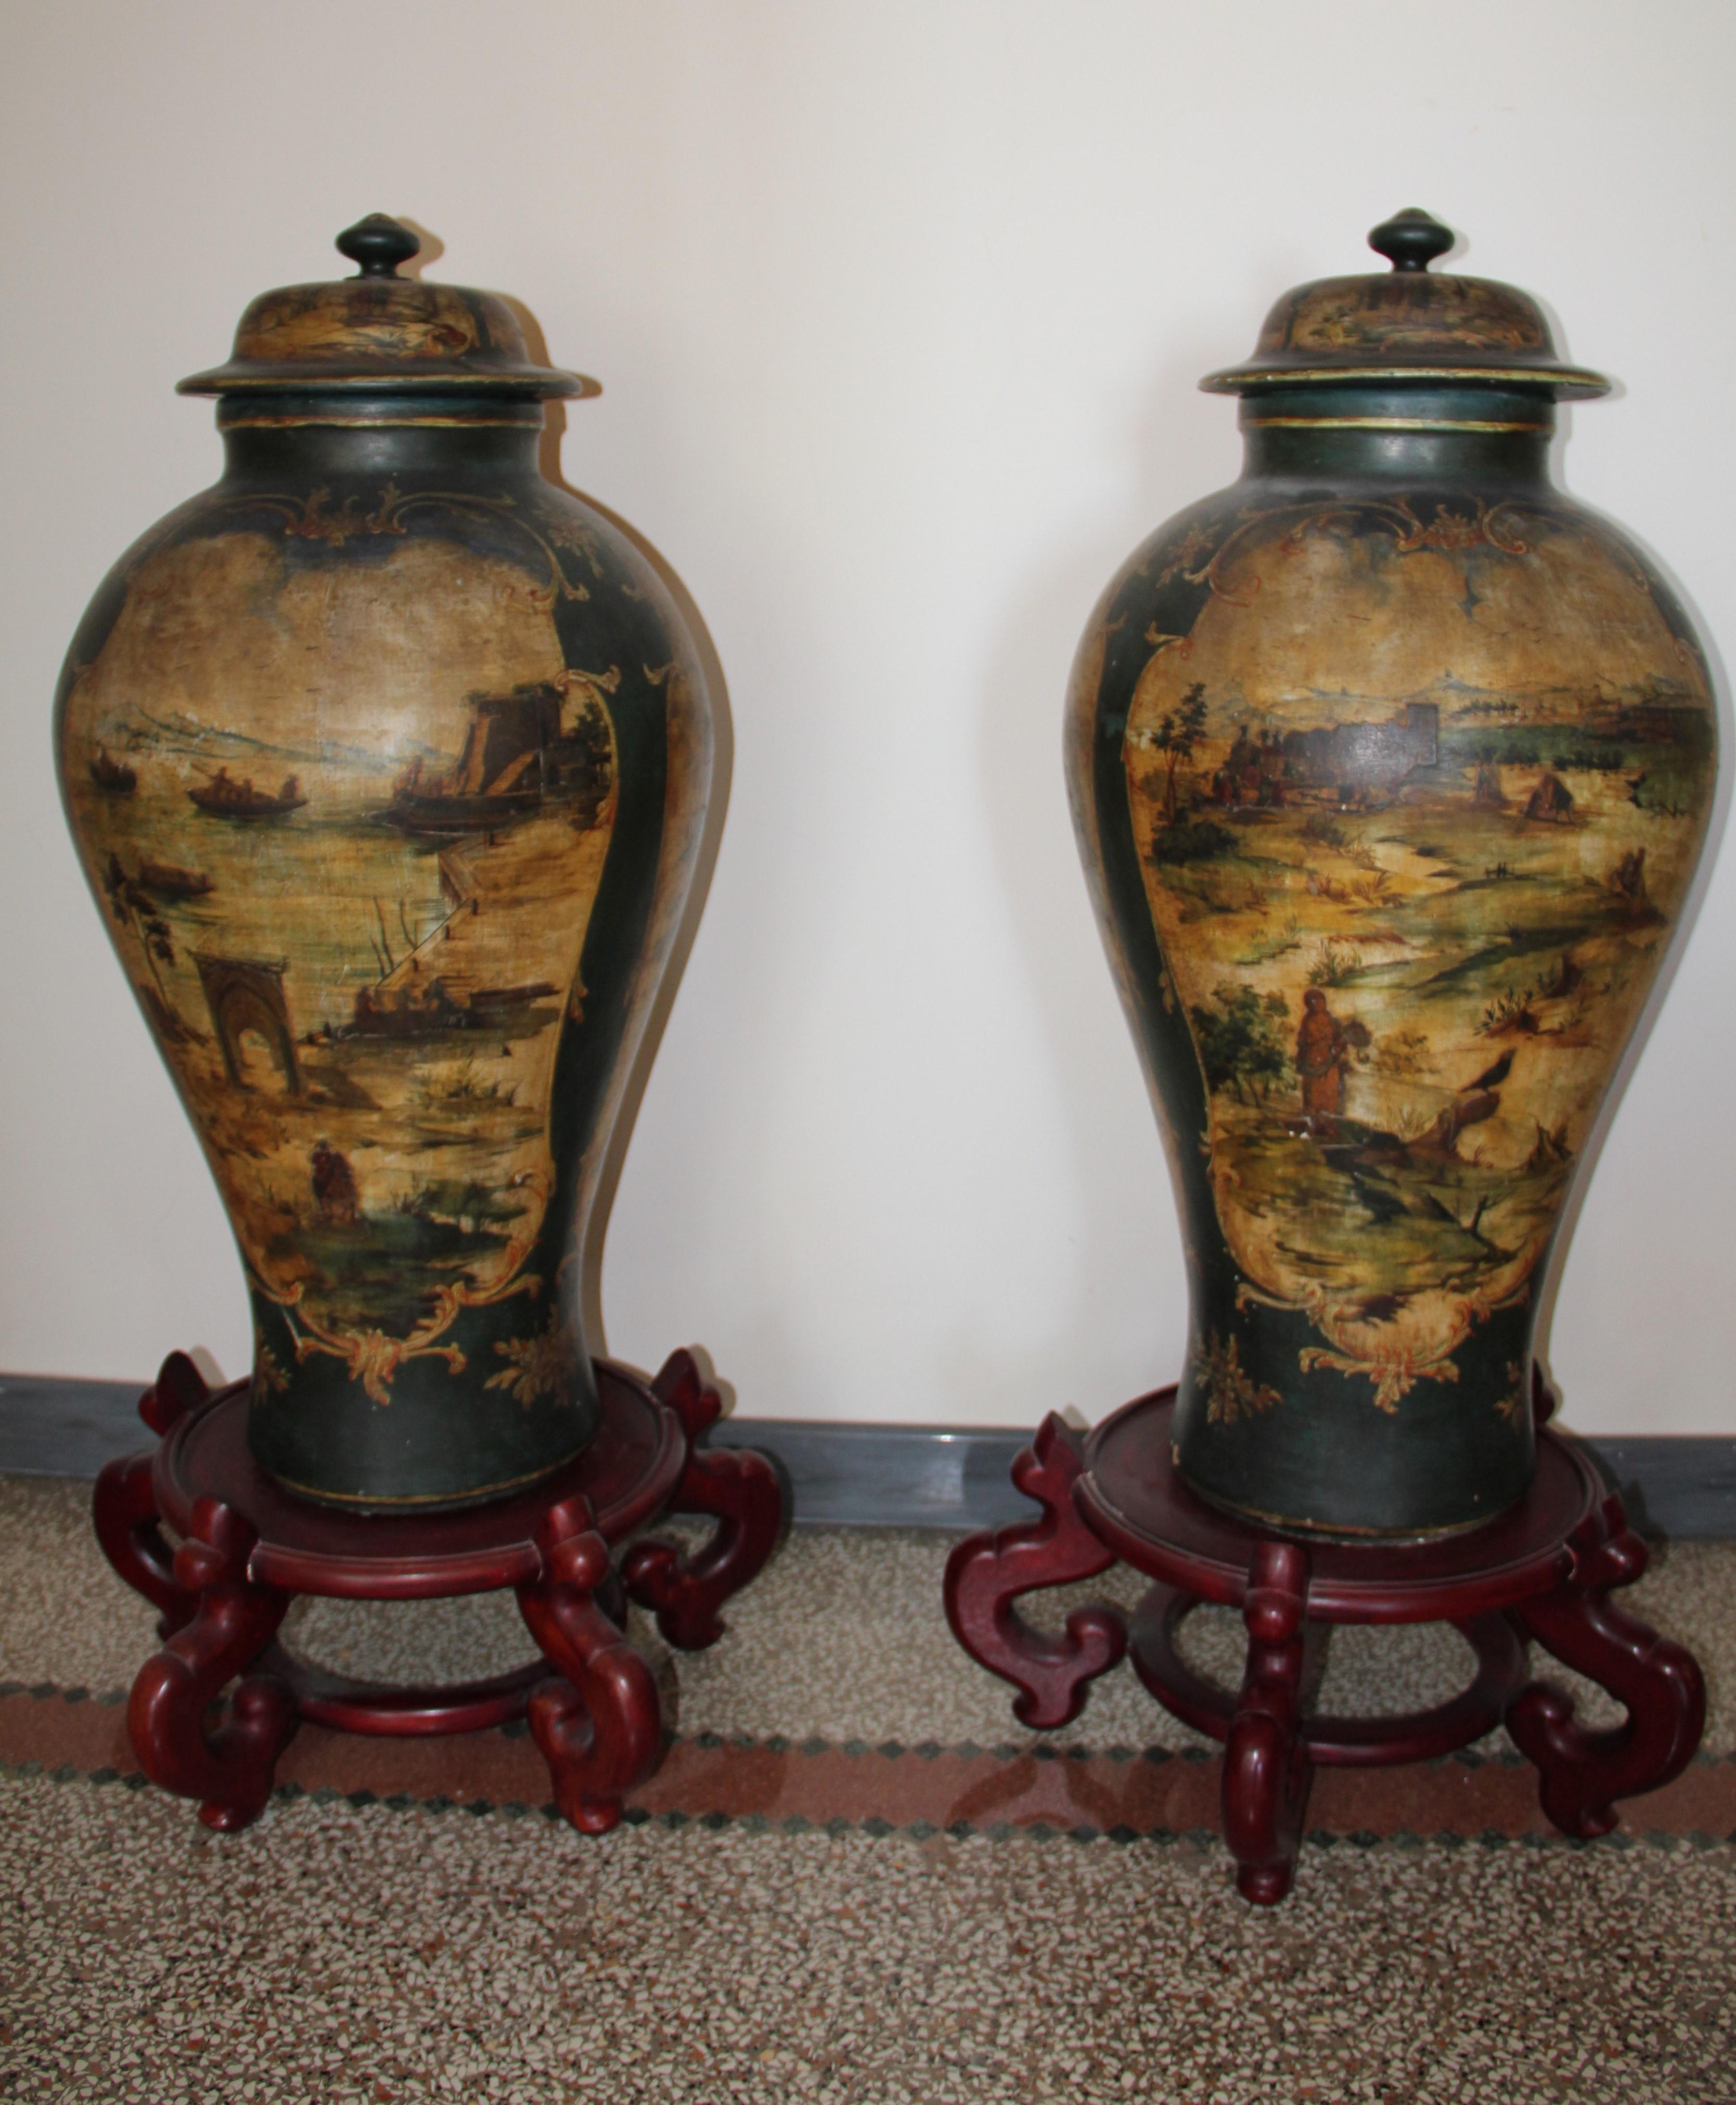 Pair of Late 18th Century Neoclassical Terracotta Monumental Vases For Sale 1